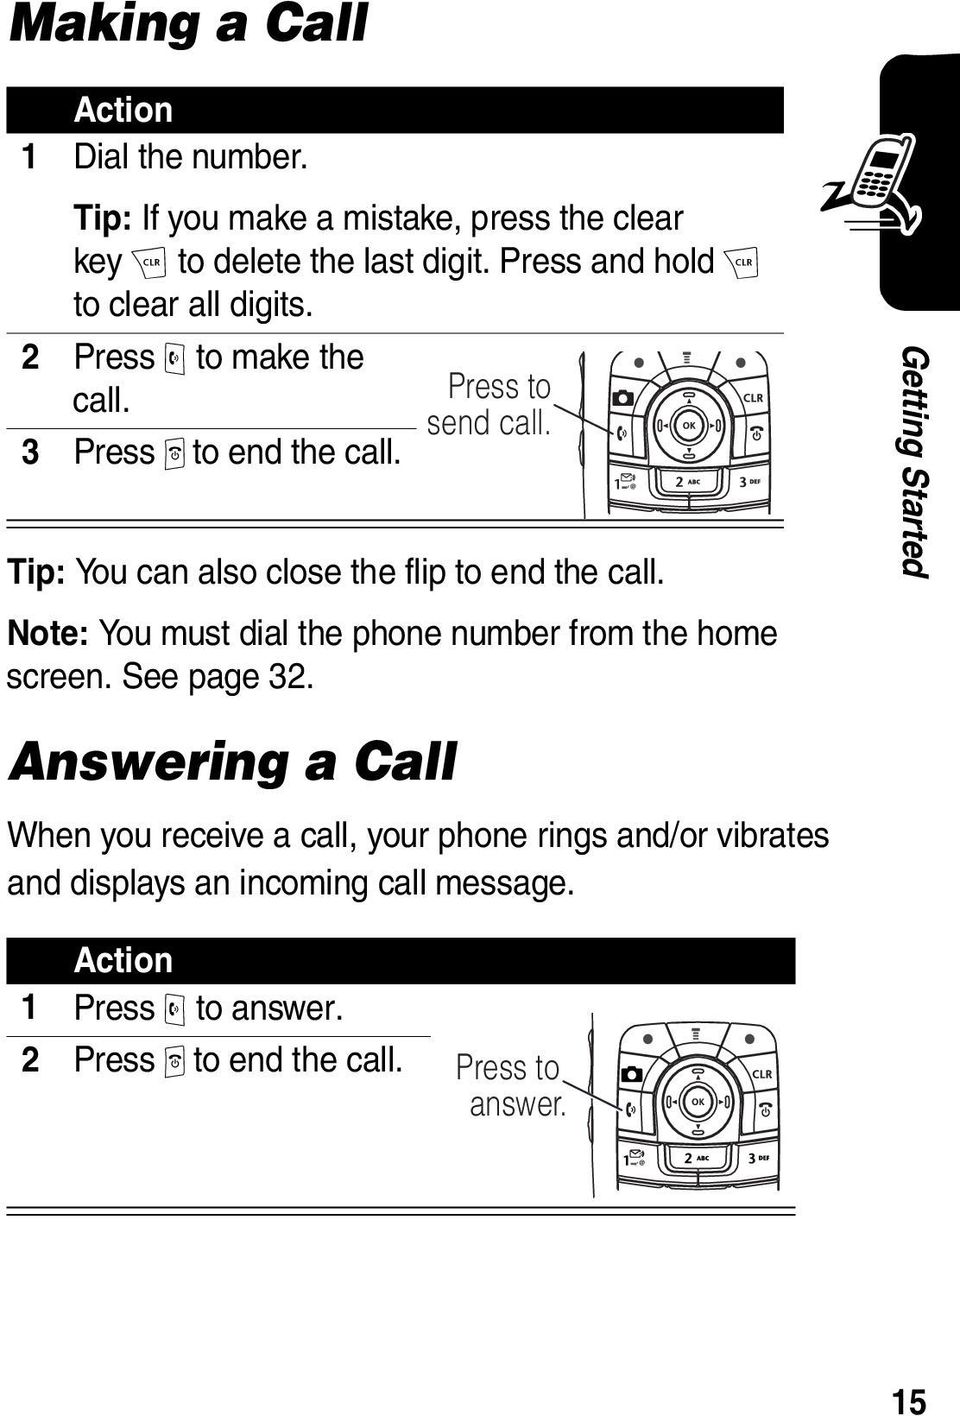 Tip: You can also close the flip to end the call. Note: You must dial the phone number from the home screen. See page 32.